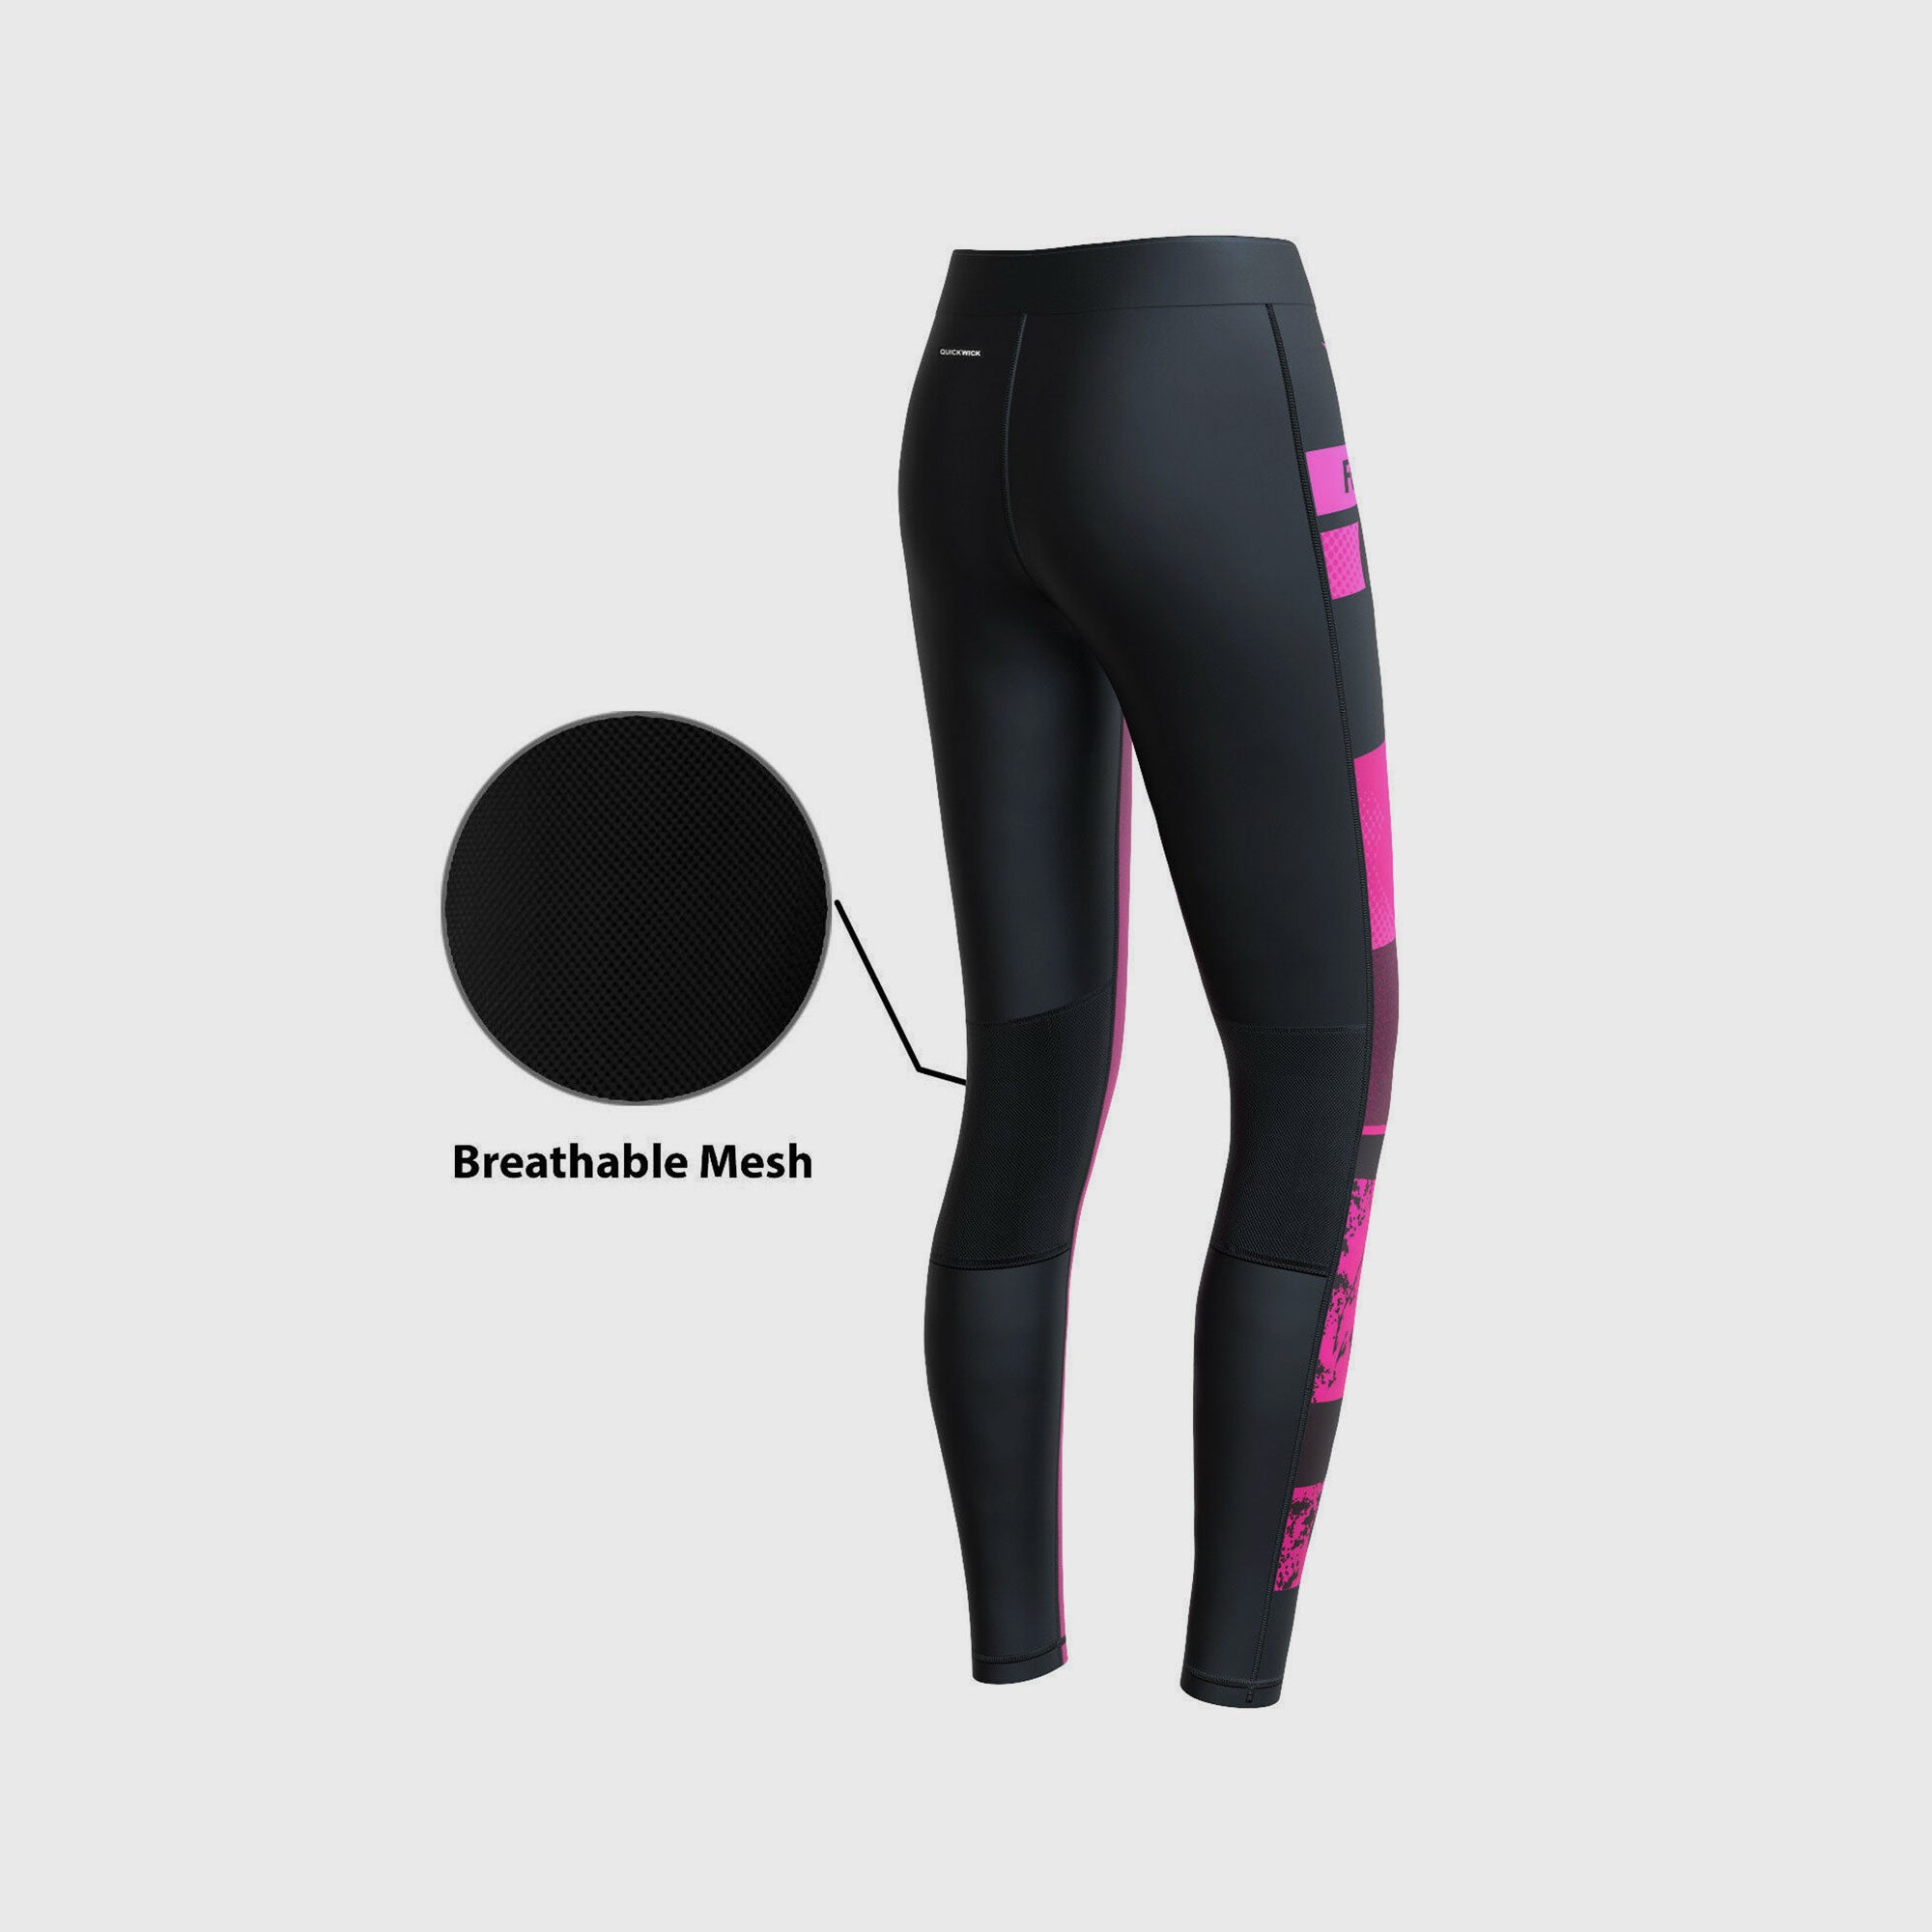 Fdx Amrap Women's Compression Running Tights Pink